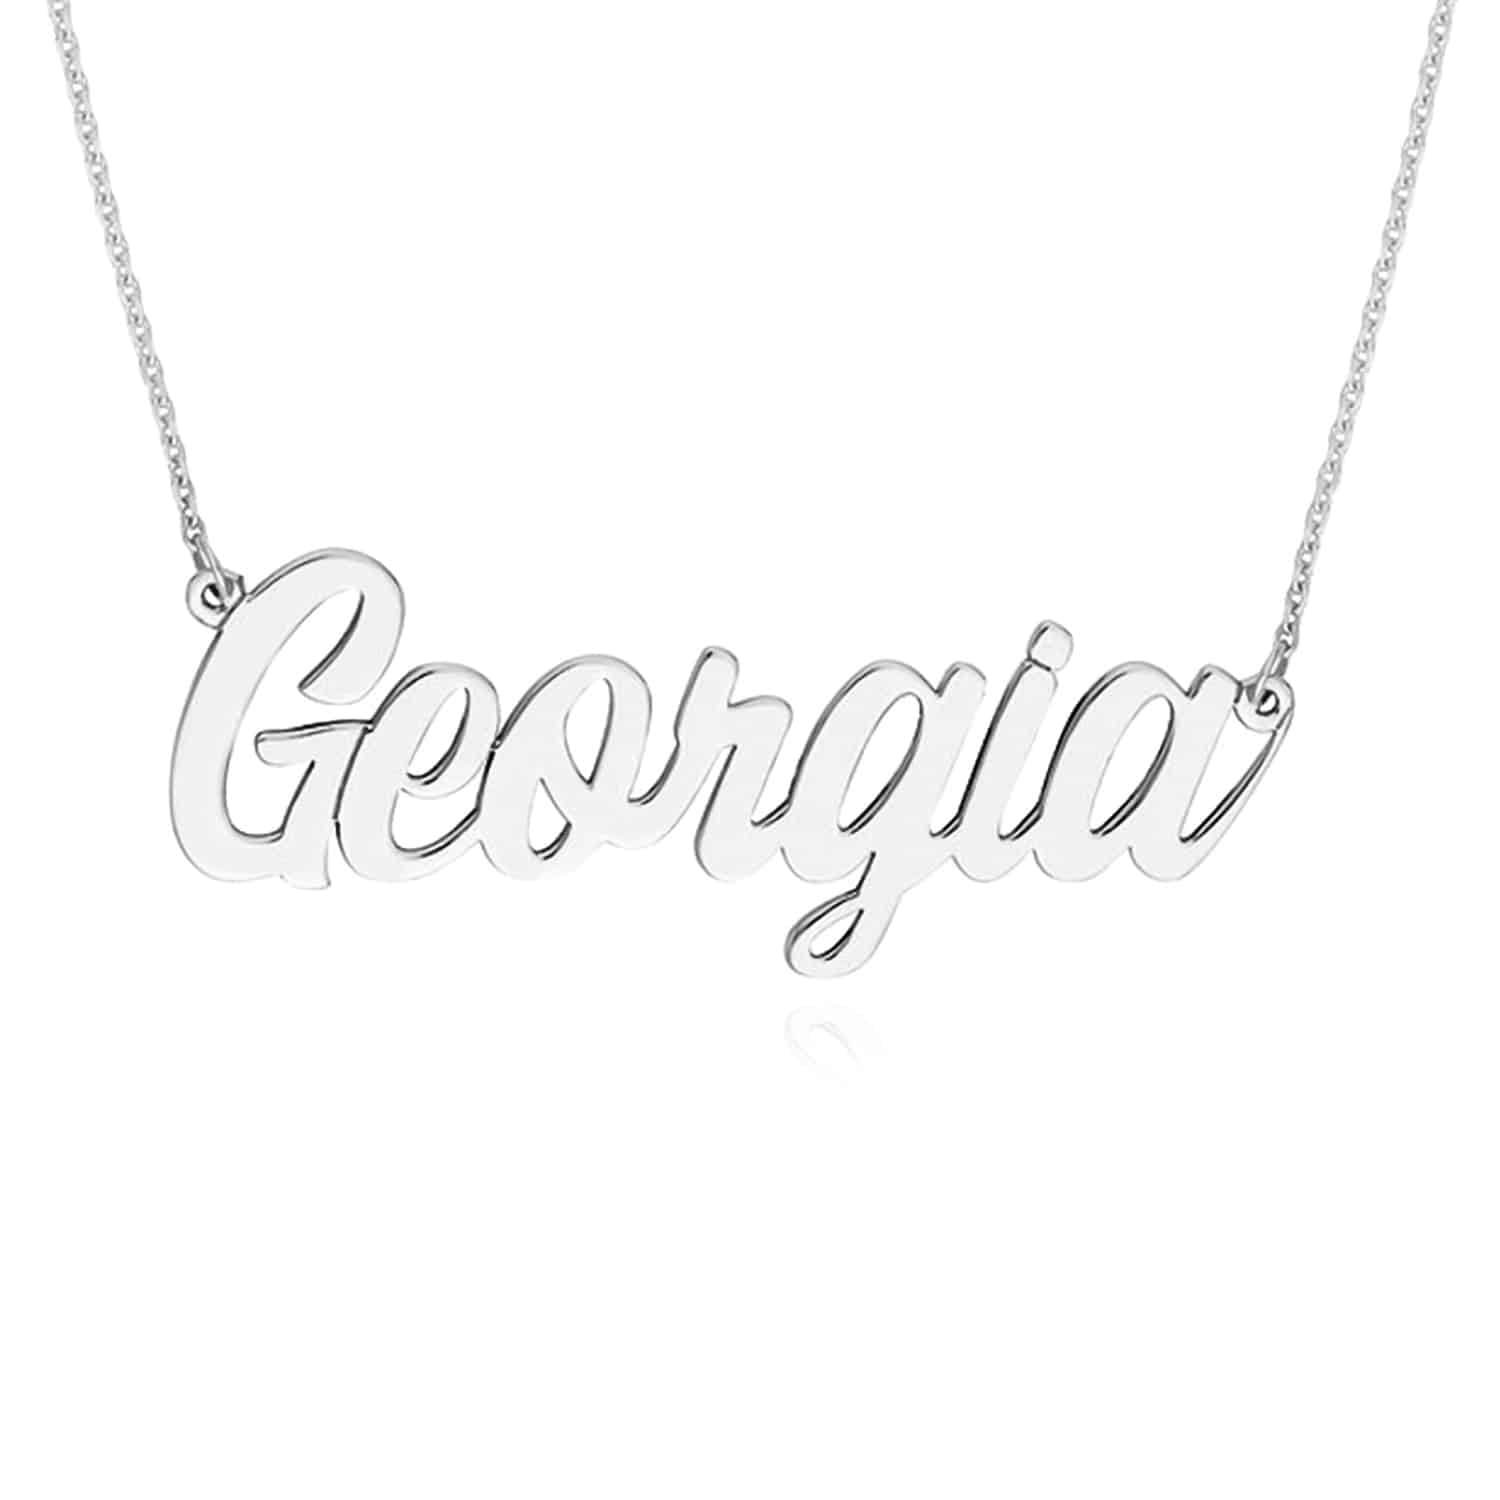 Customizable 14K Gold Yellow White Rose Script Nameplate Pendant Necklace 14-18" - White Gold, 14"-16" Adjustable